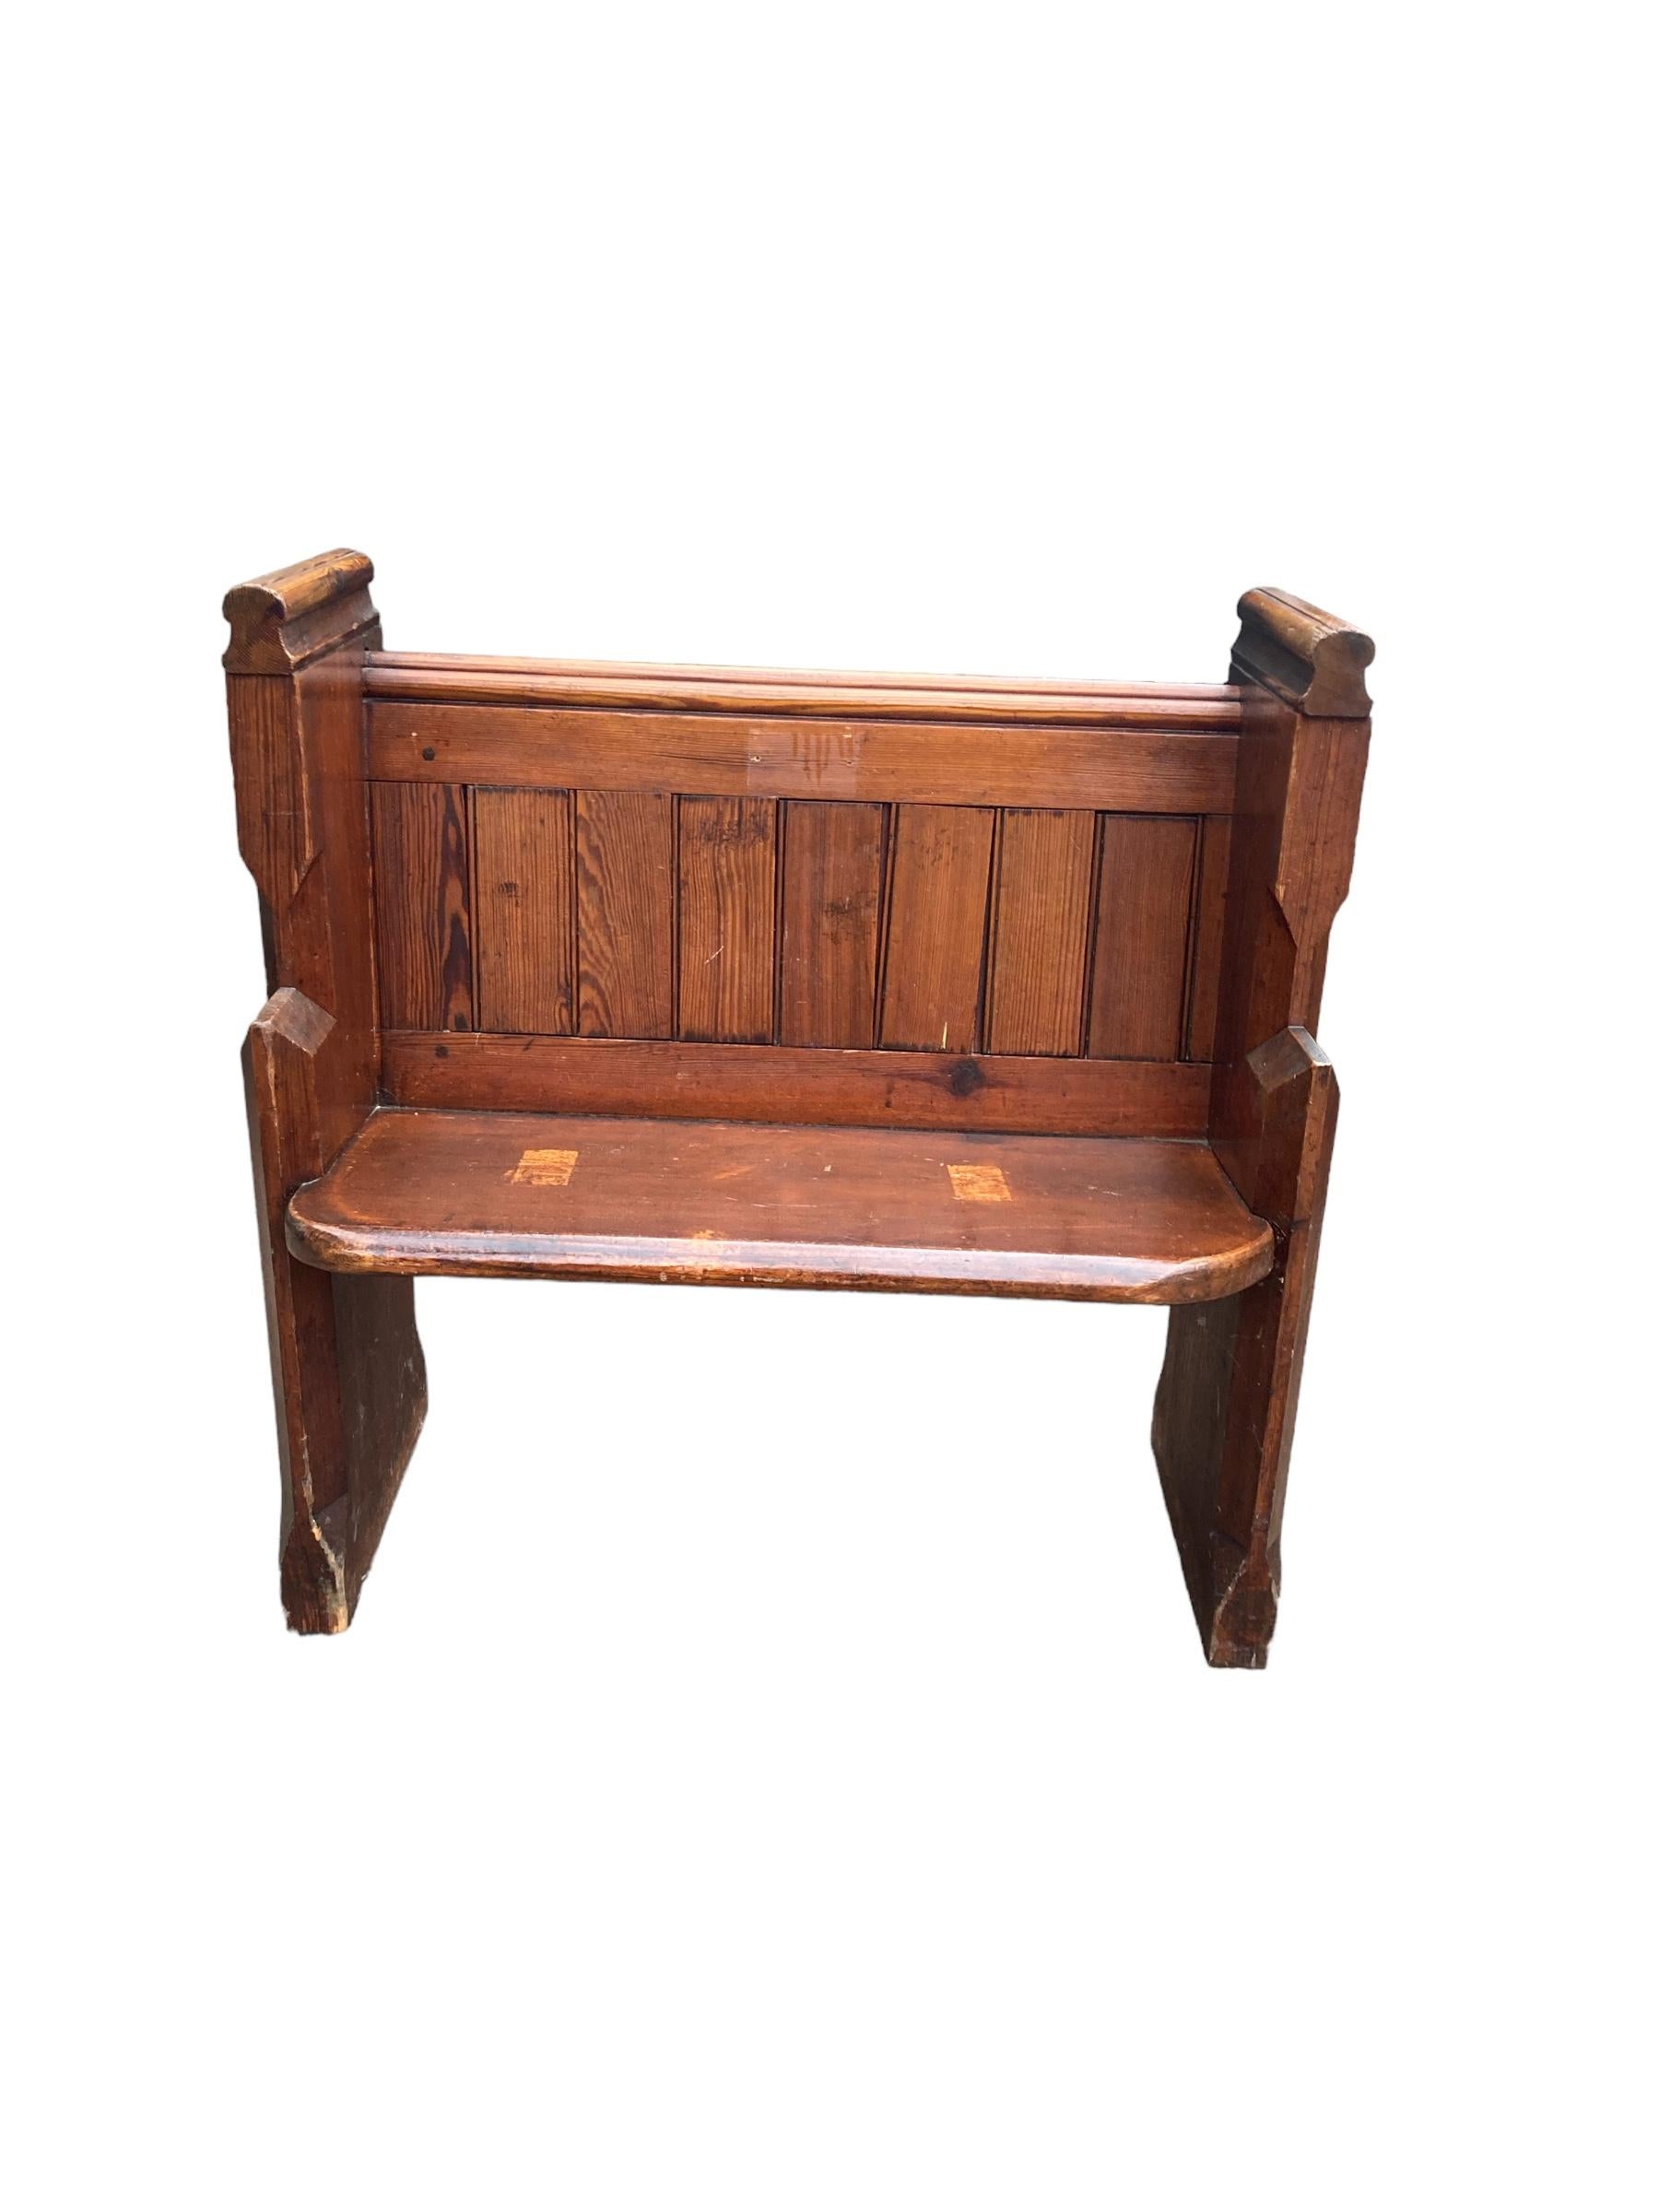 Antique Oak Gothic style Church pew in Original Condition with numbers 44 on side. Shows signs of wear which adds to its character. Made with Heavy Oak, this is perfect for any Hall way or Mud room.

H: 93 cm W: 90 cm D: 50 cm Seat H: 48 cm